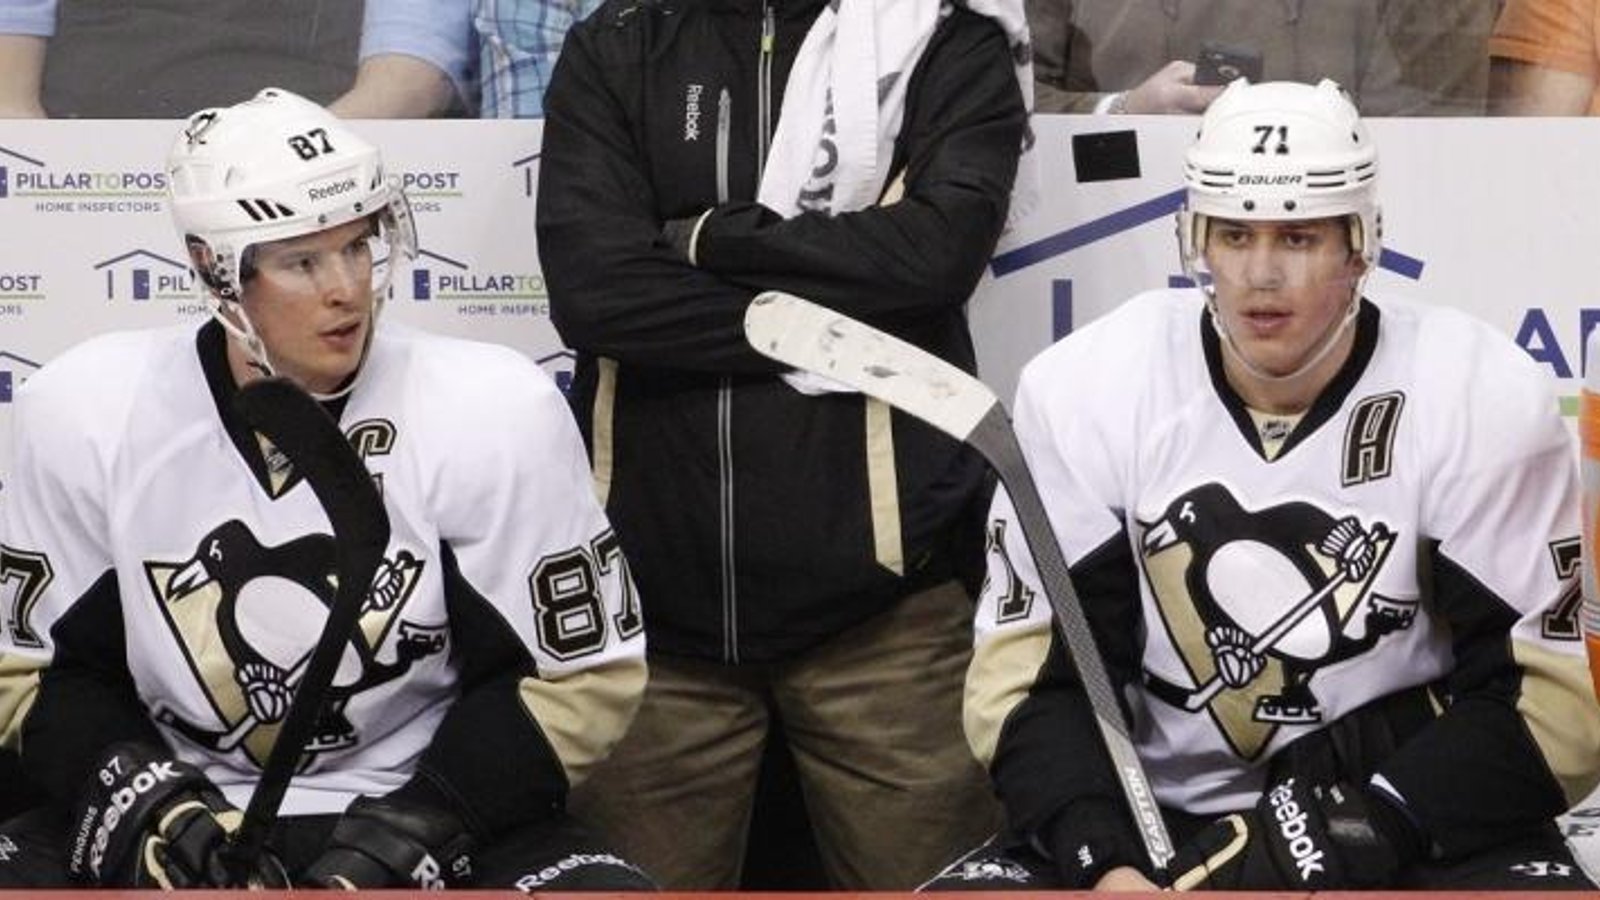 Breaking: Penguins star sidelined with an injury ahead of some big games.